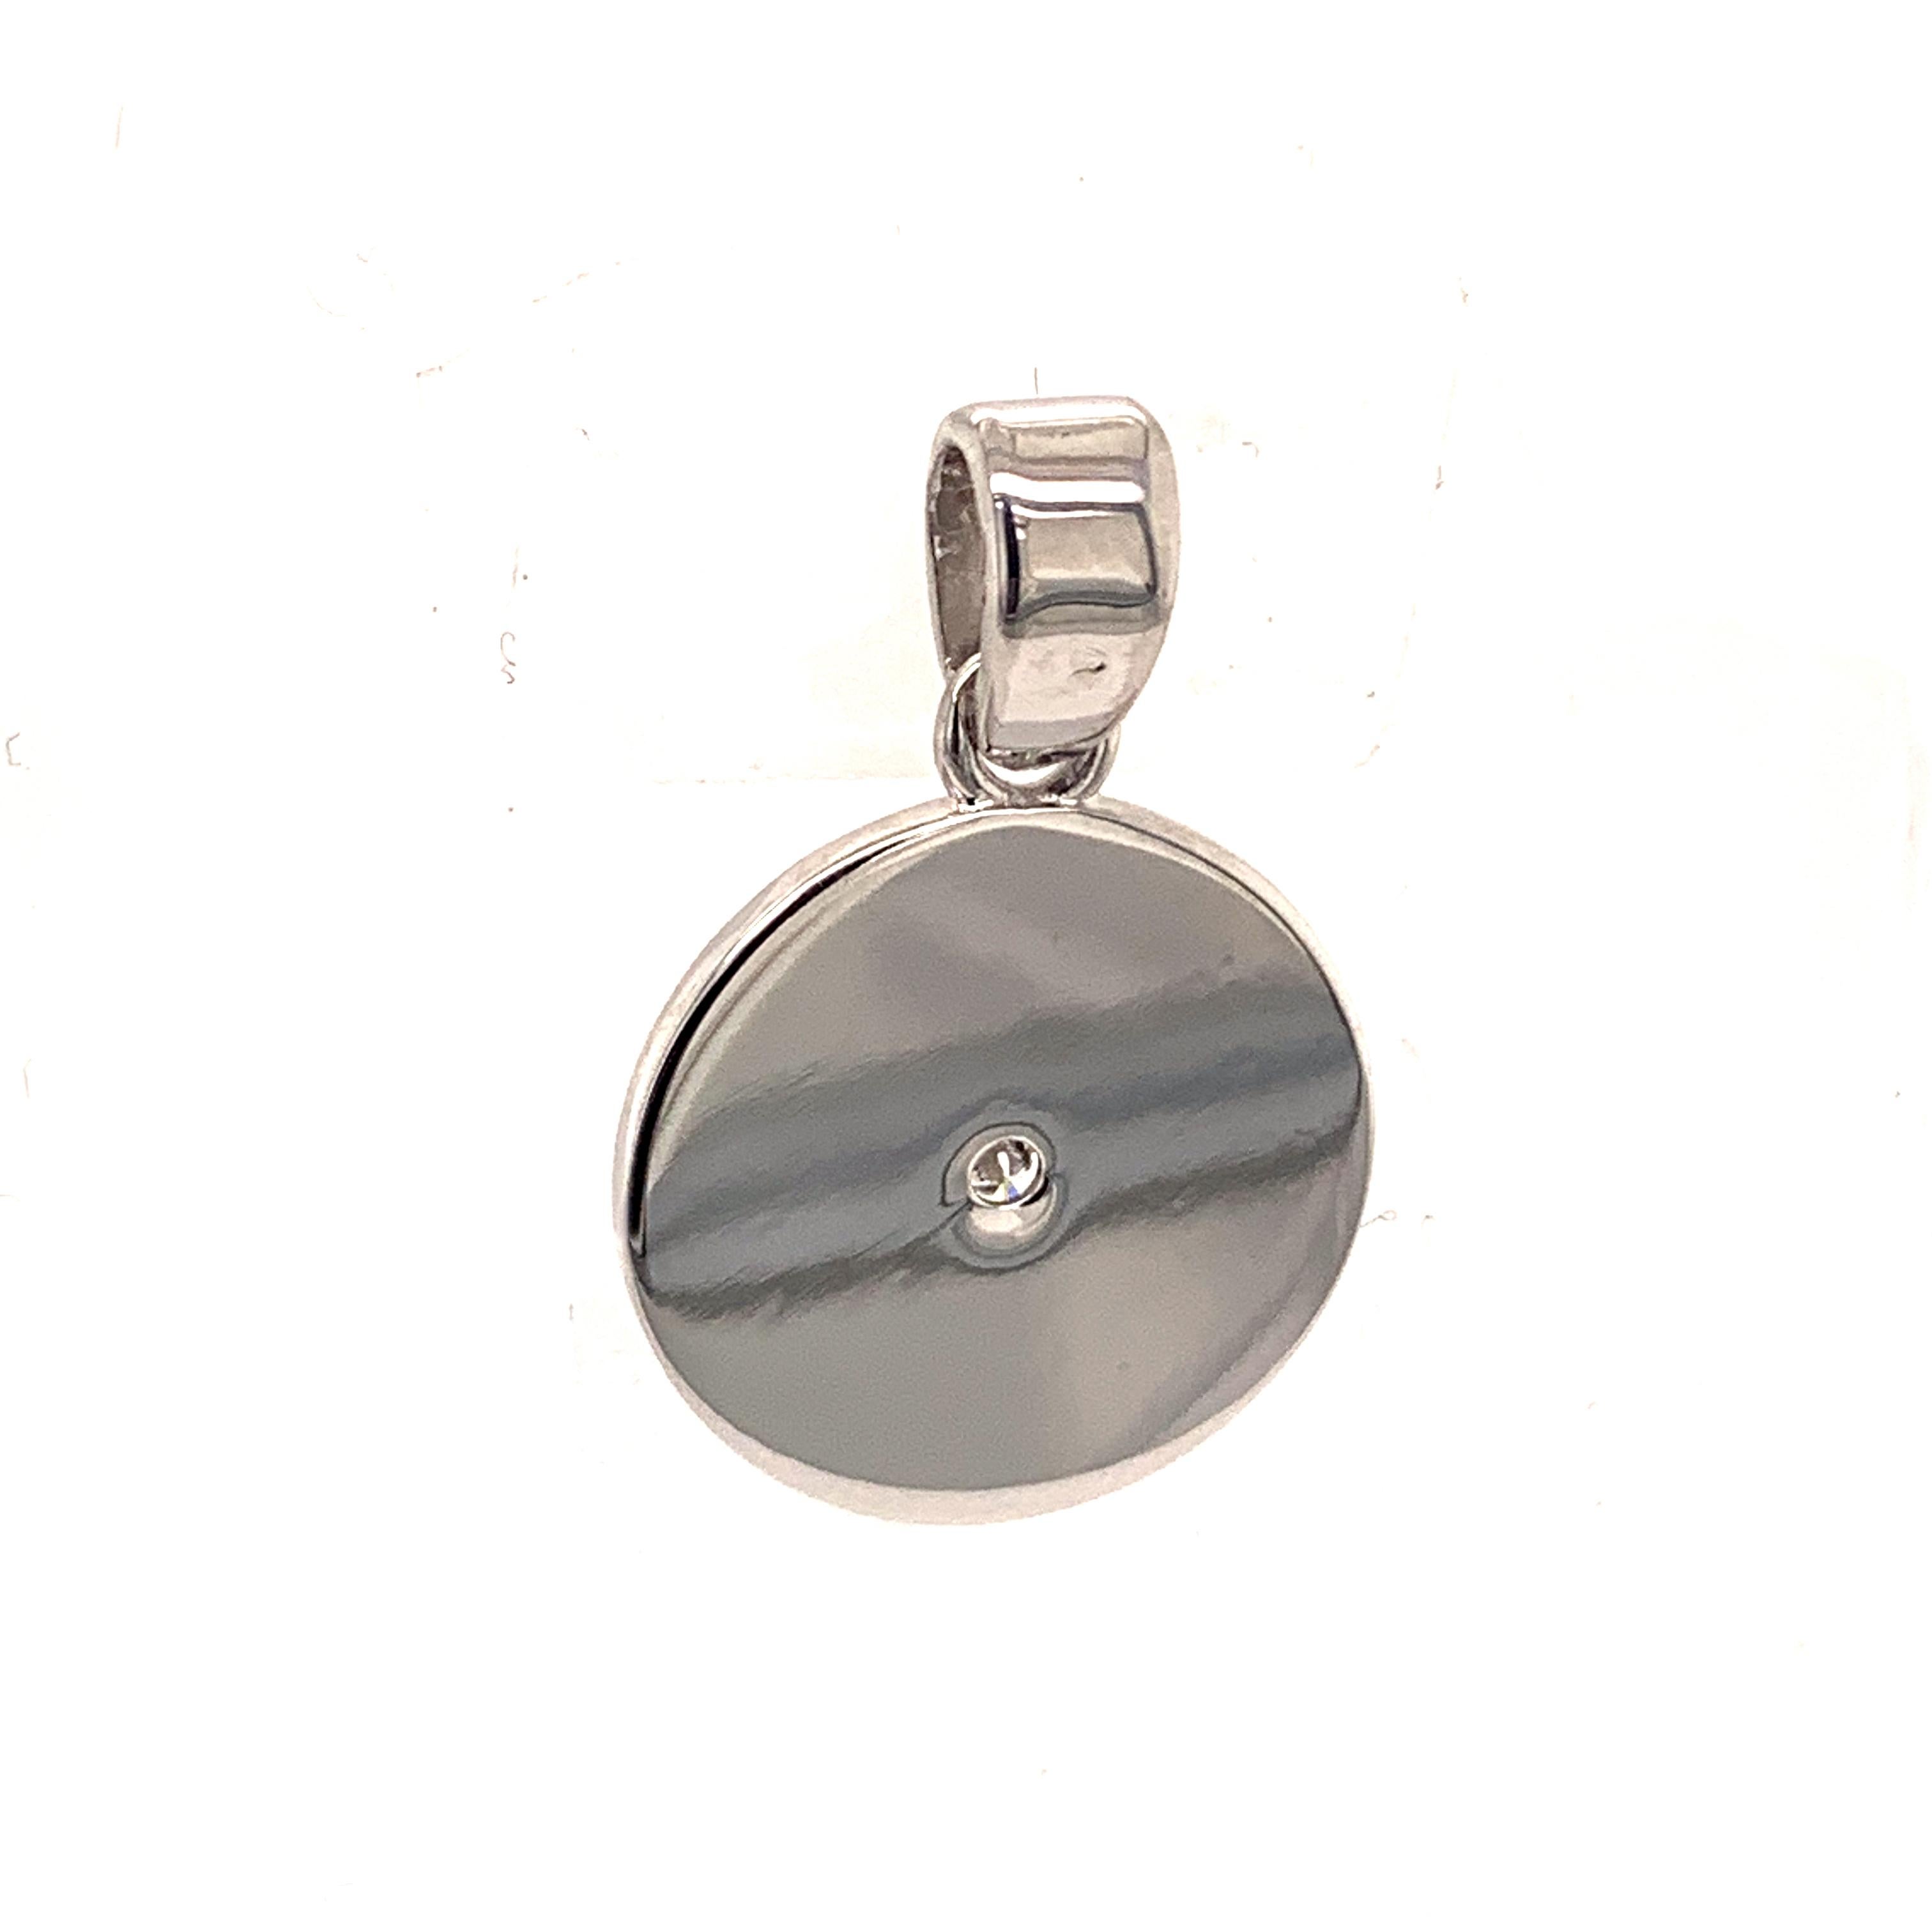 Cartier White Gold and Diamond Pendant/Charm 1